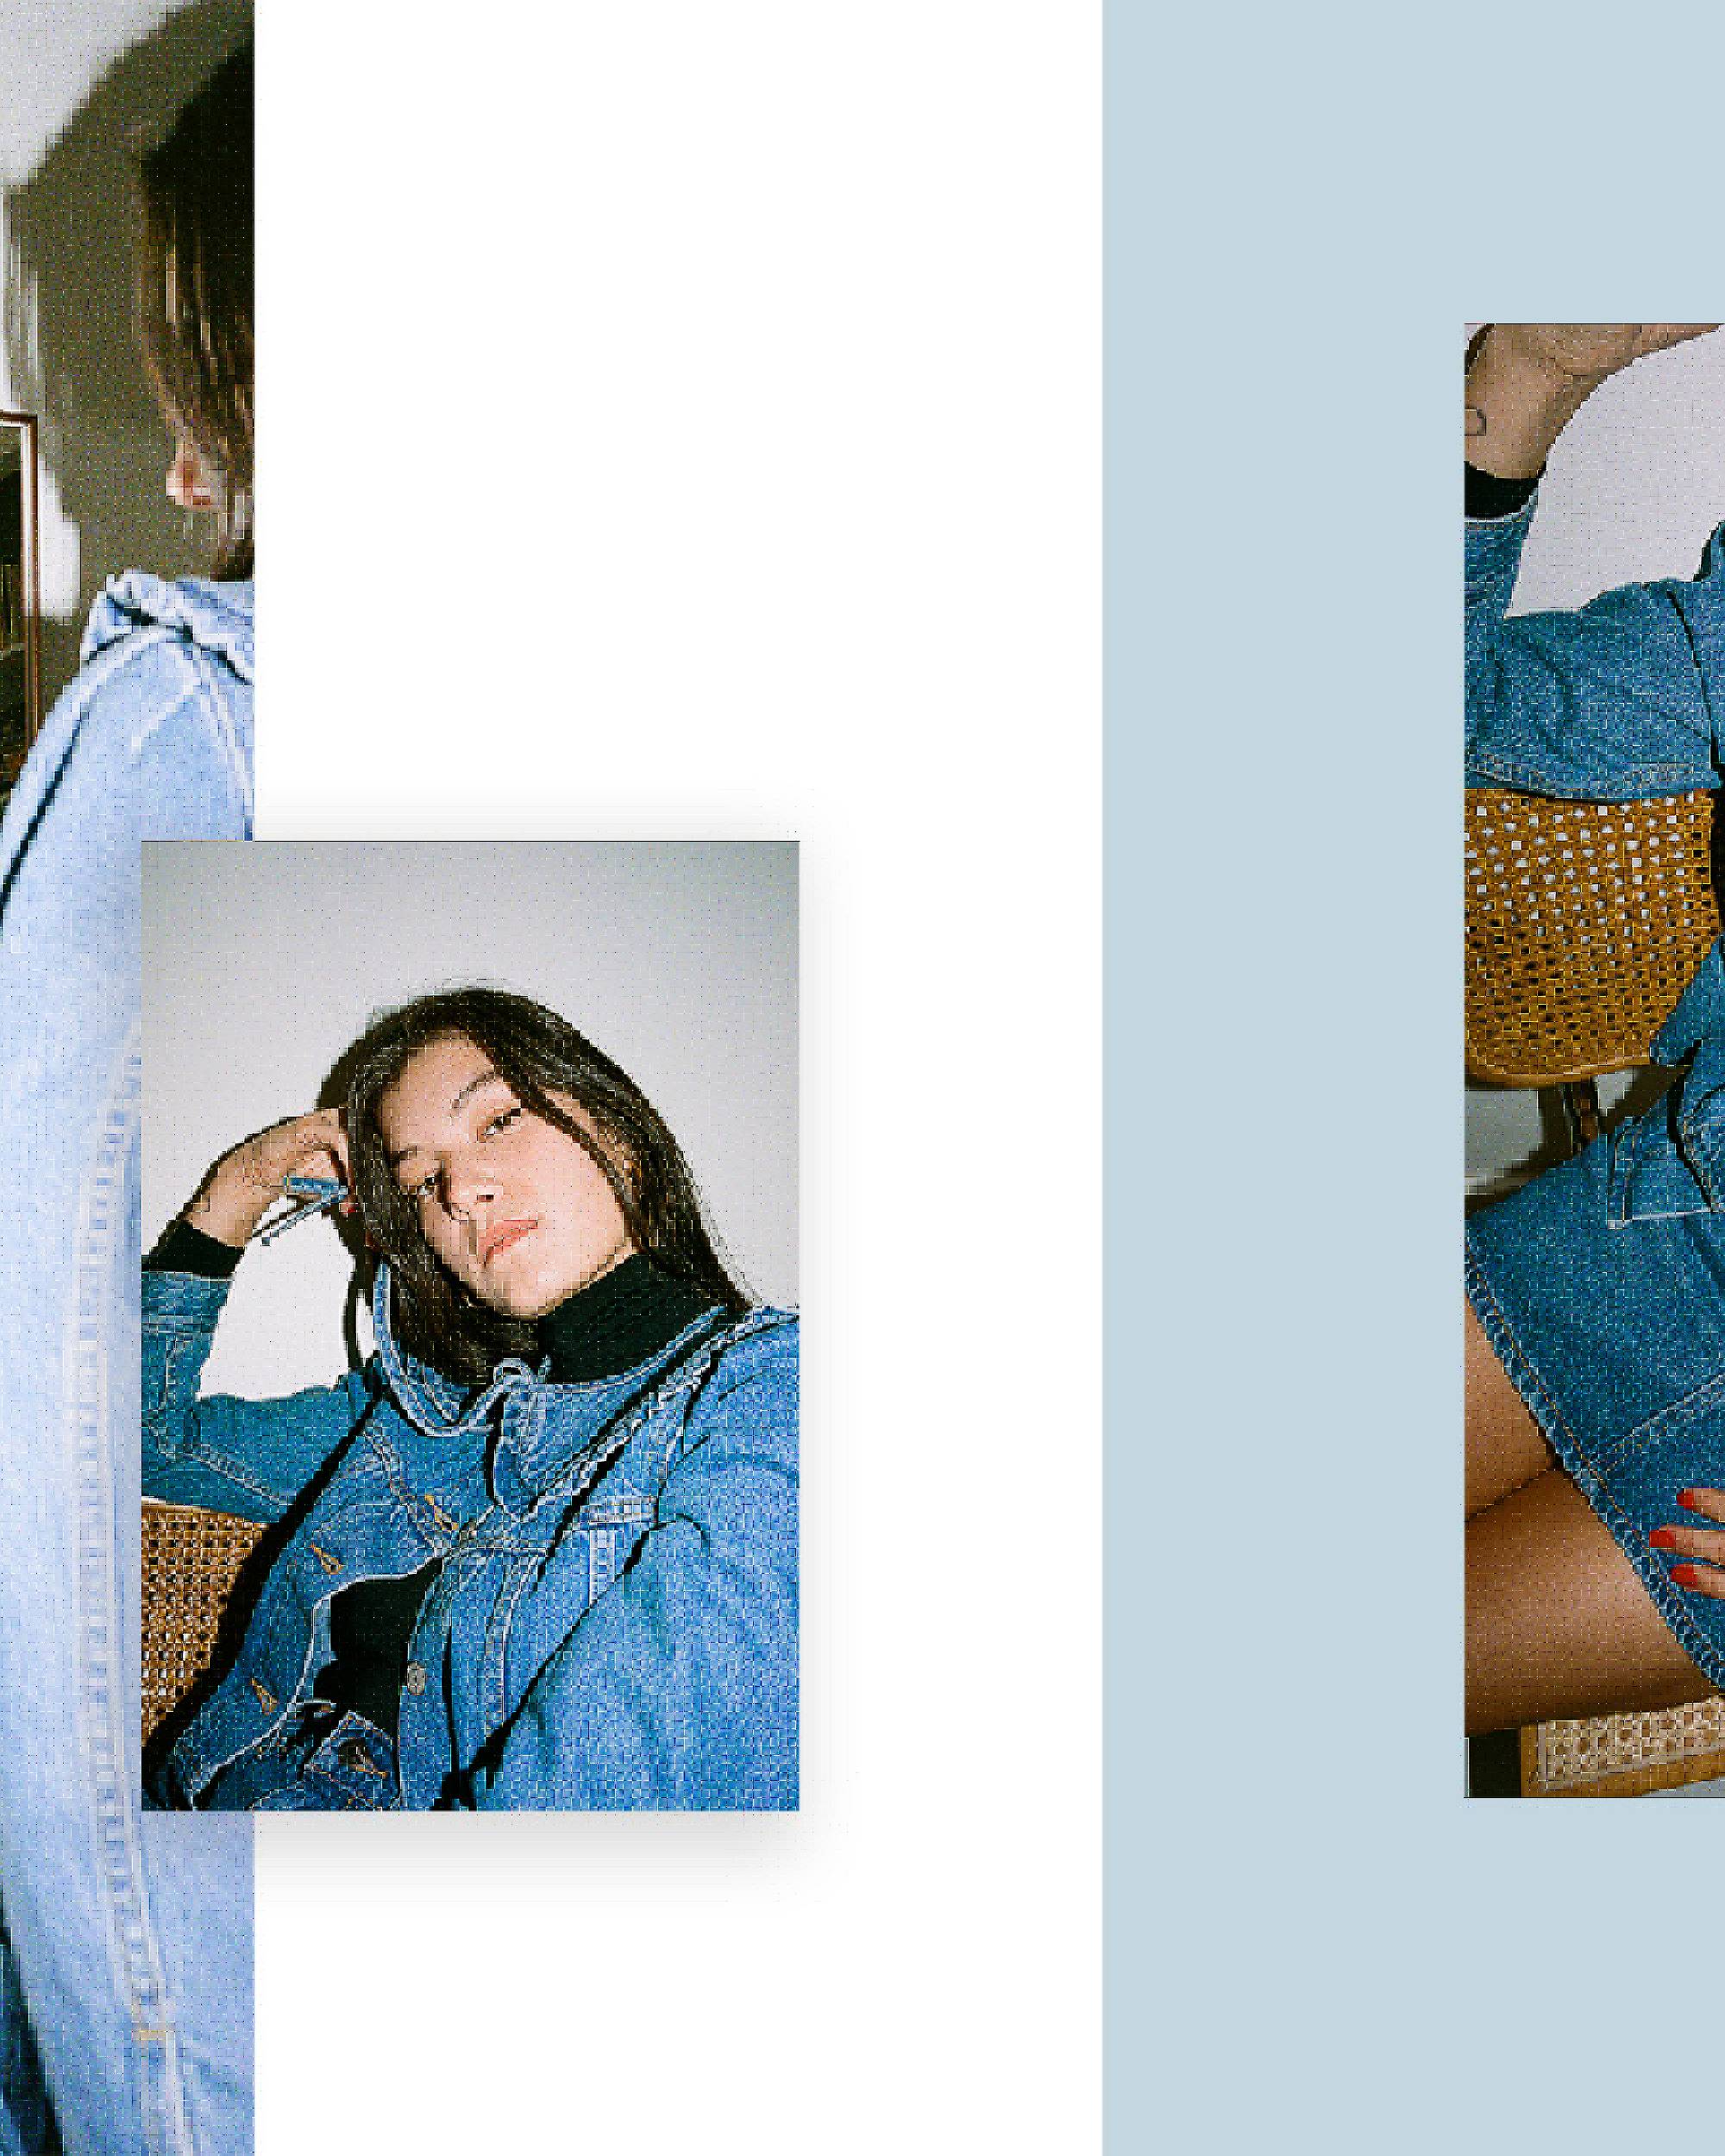 Three different photos, one of a women looking in a mirror wearing a denim skirt and jacket, a close up shot of her looking at the camera and one of her sitting in a chair with the camera looking down at her